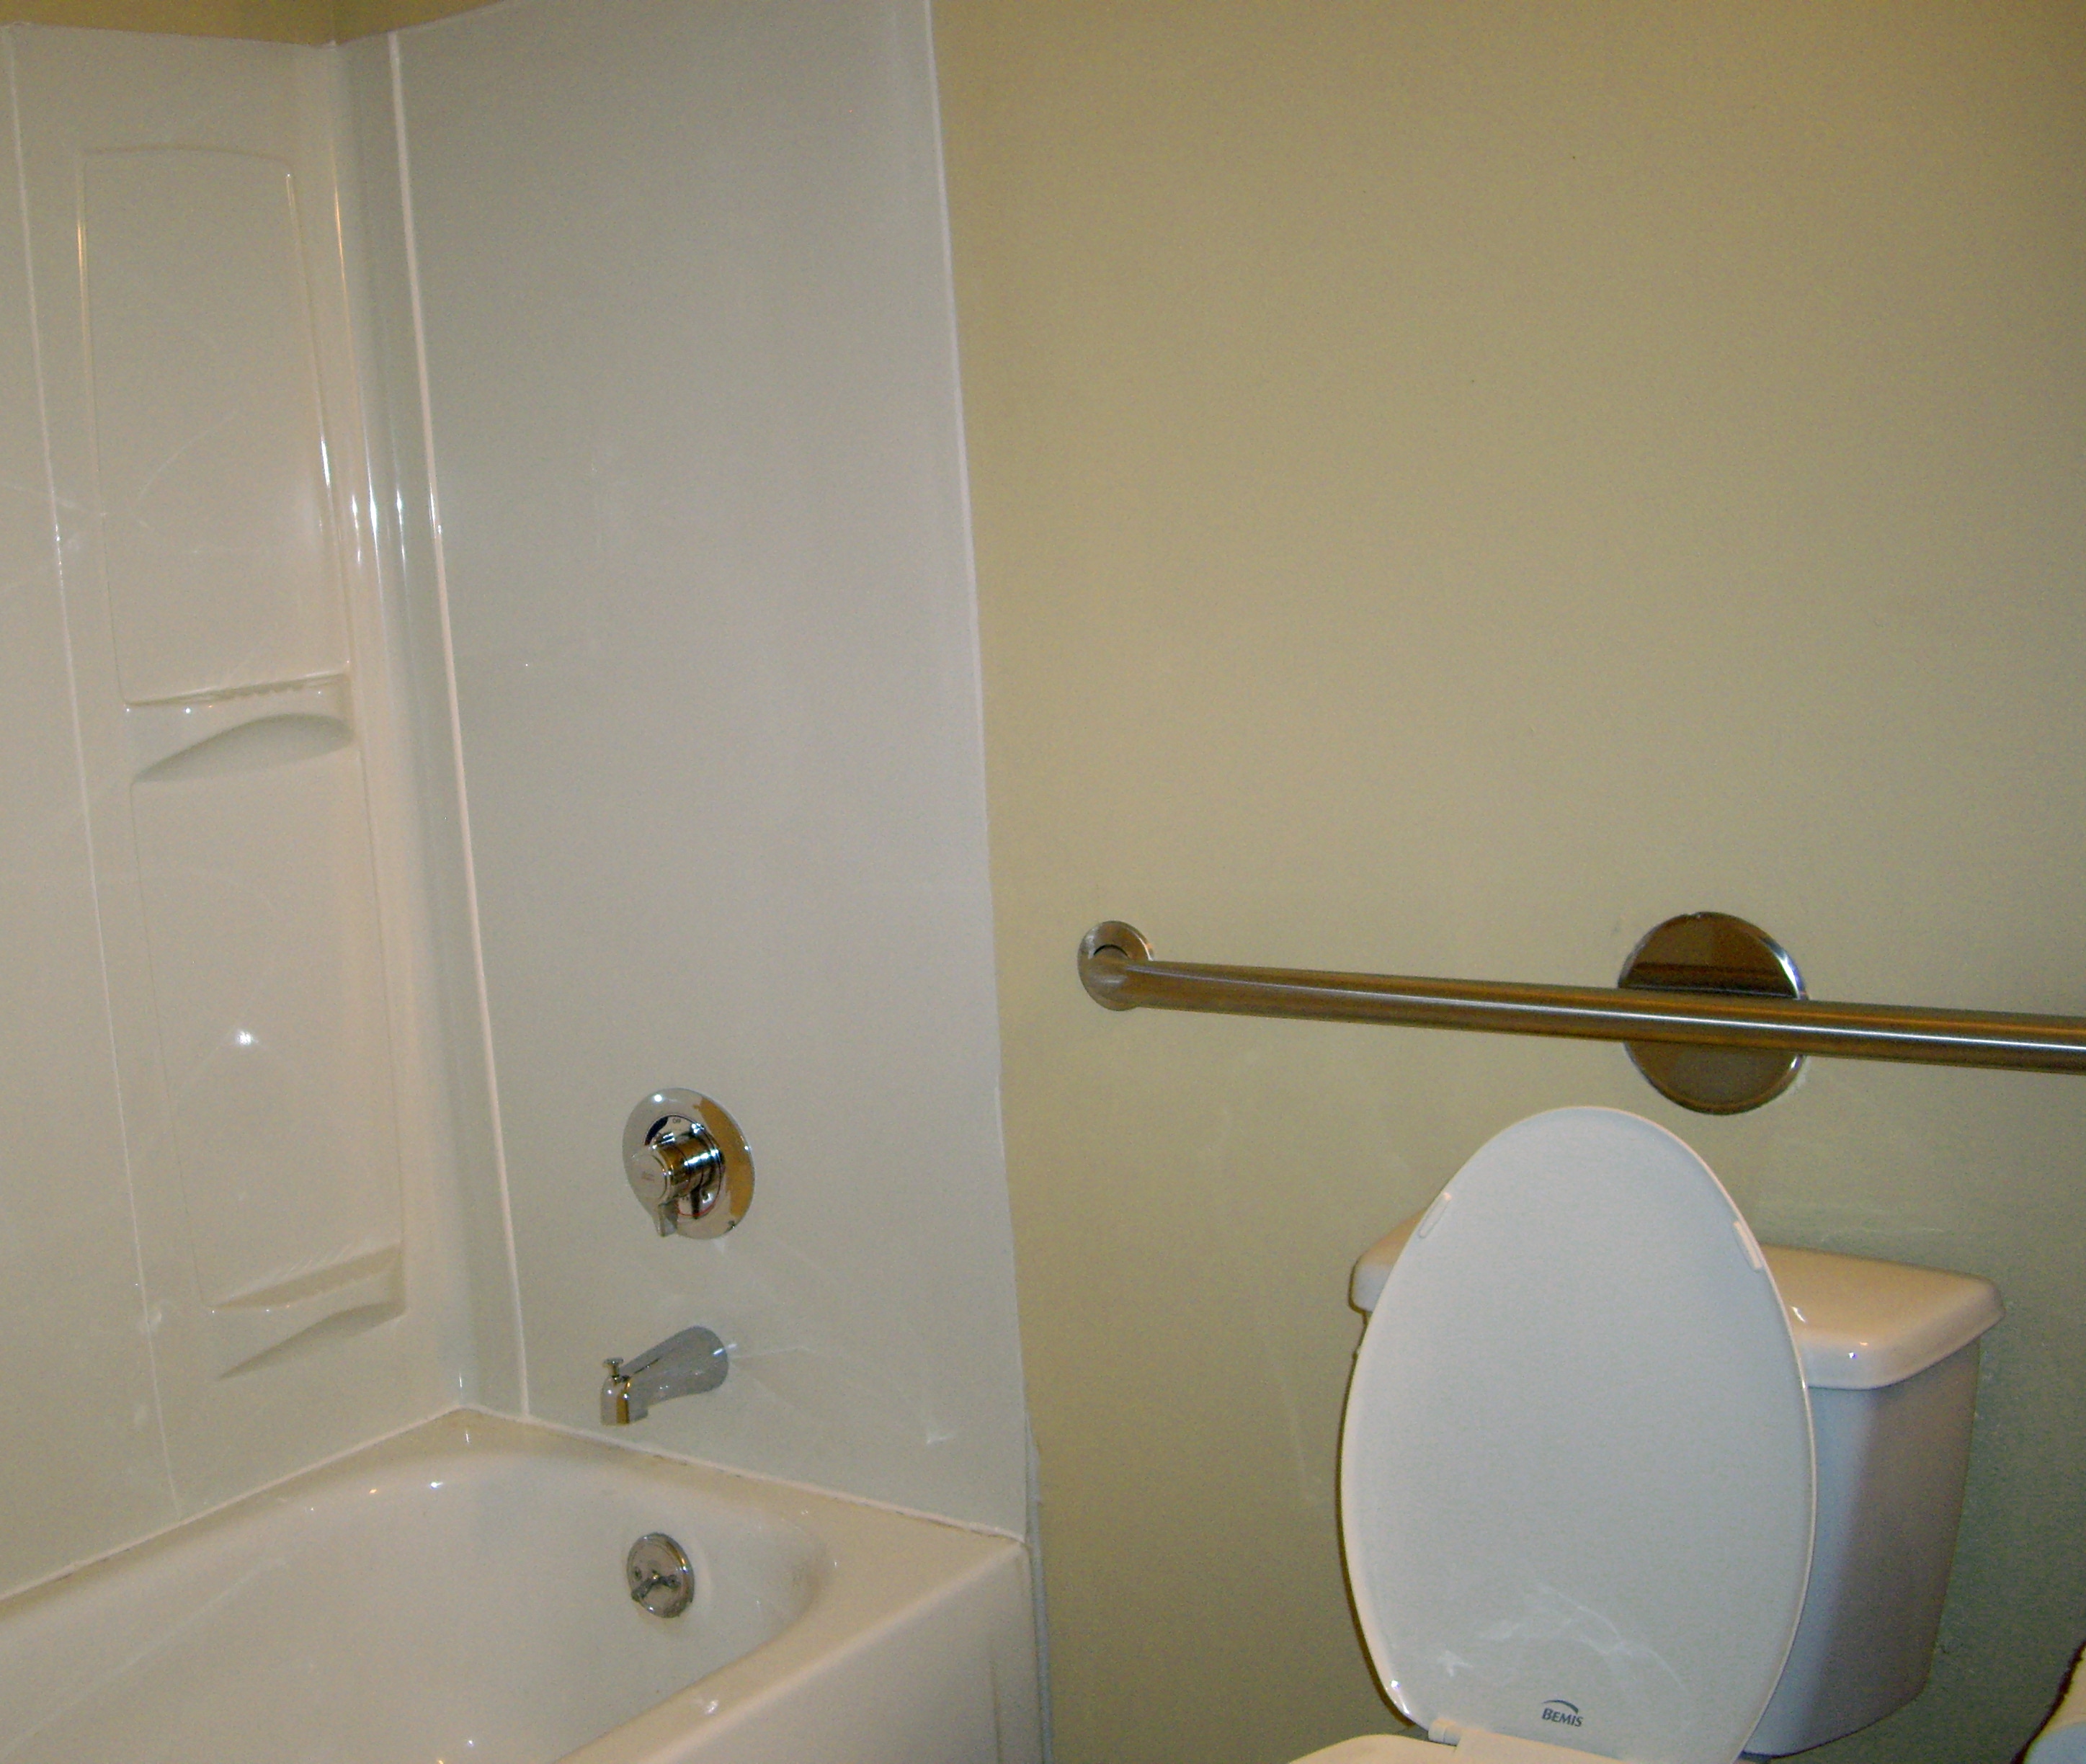 Grab Bar Wikipedia, Grab Bars For The Bathroom Near Toilet And Shower Systems